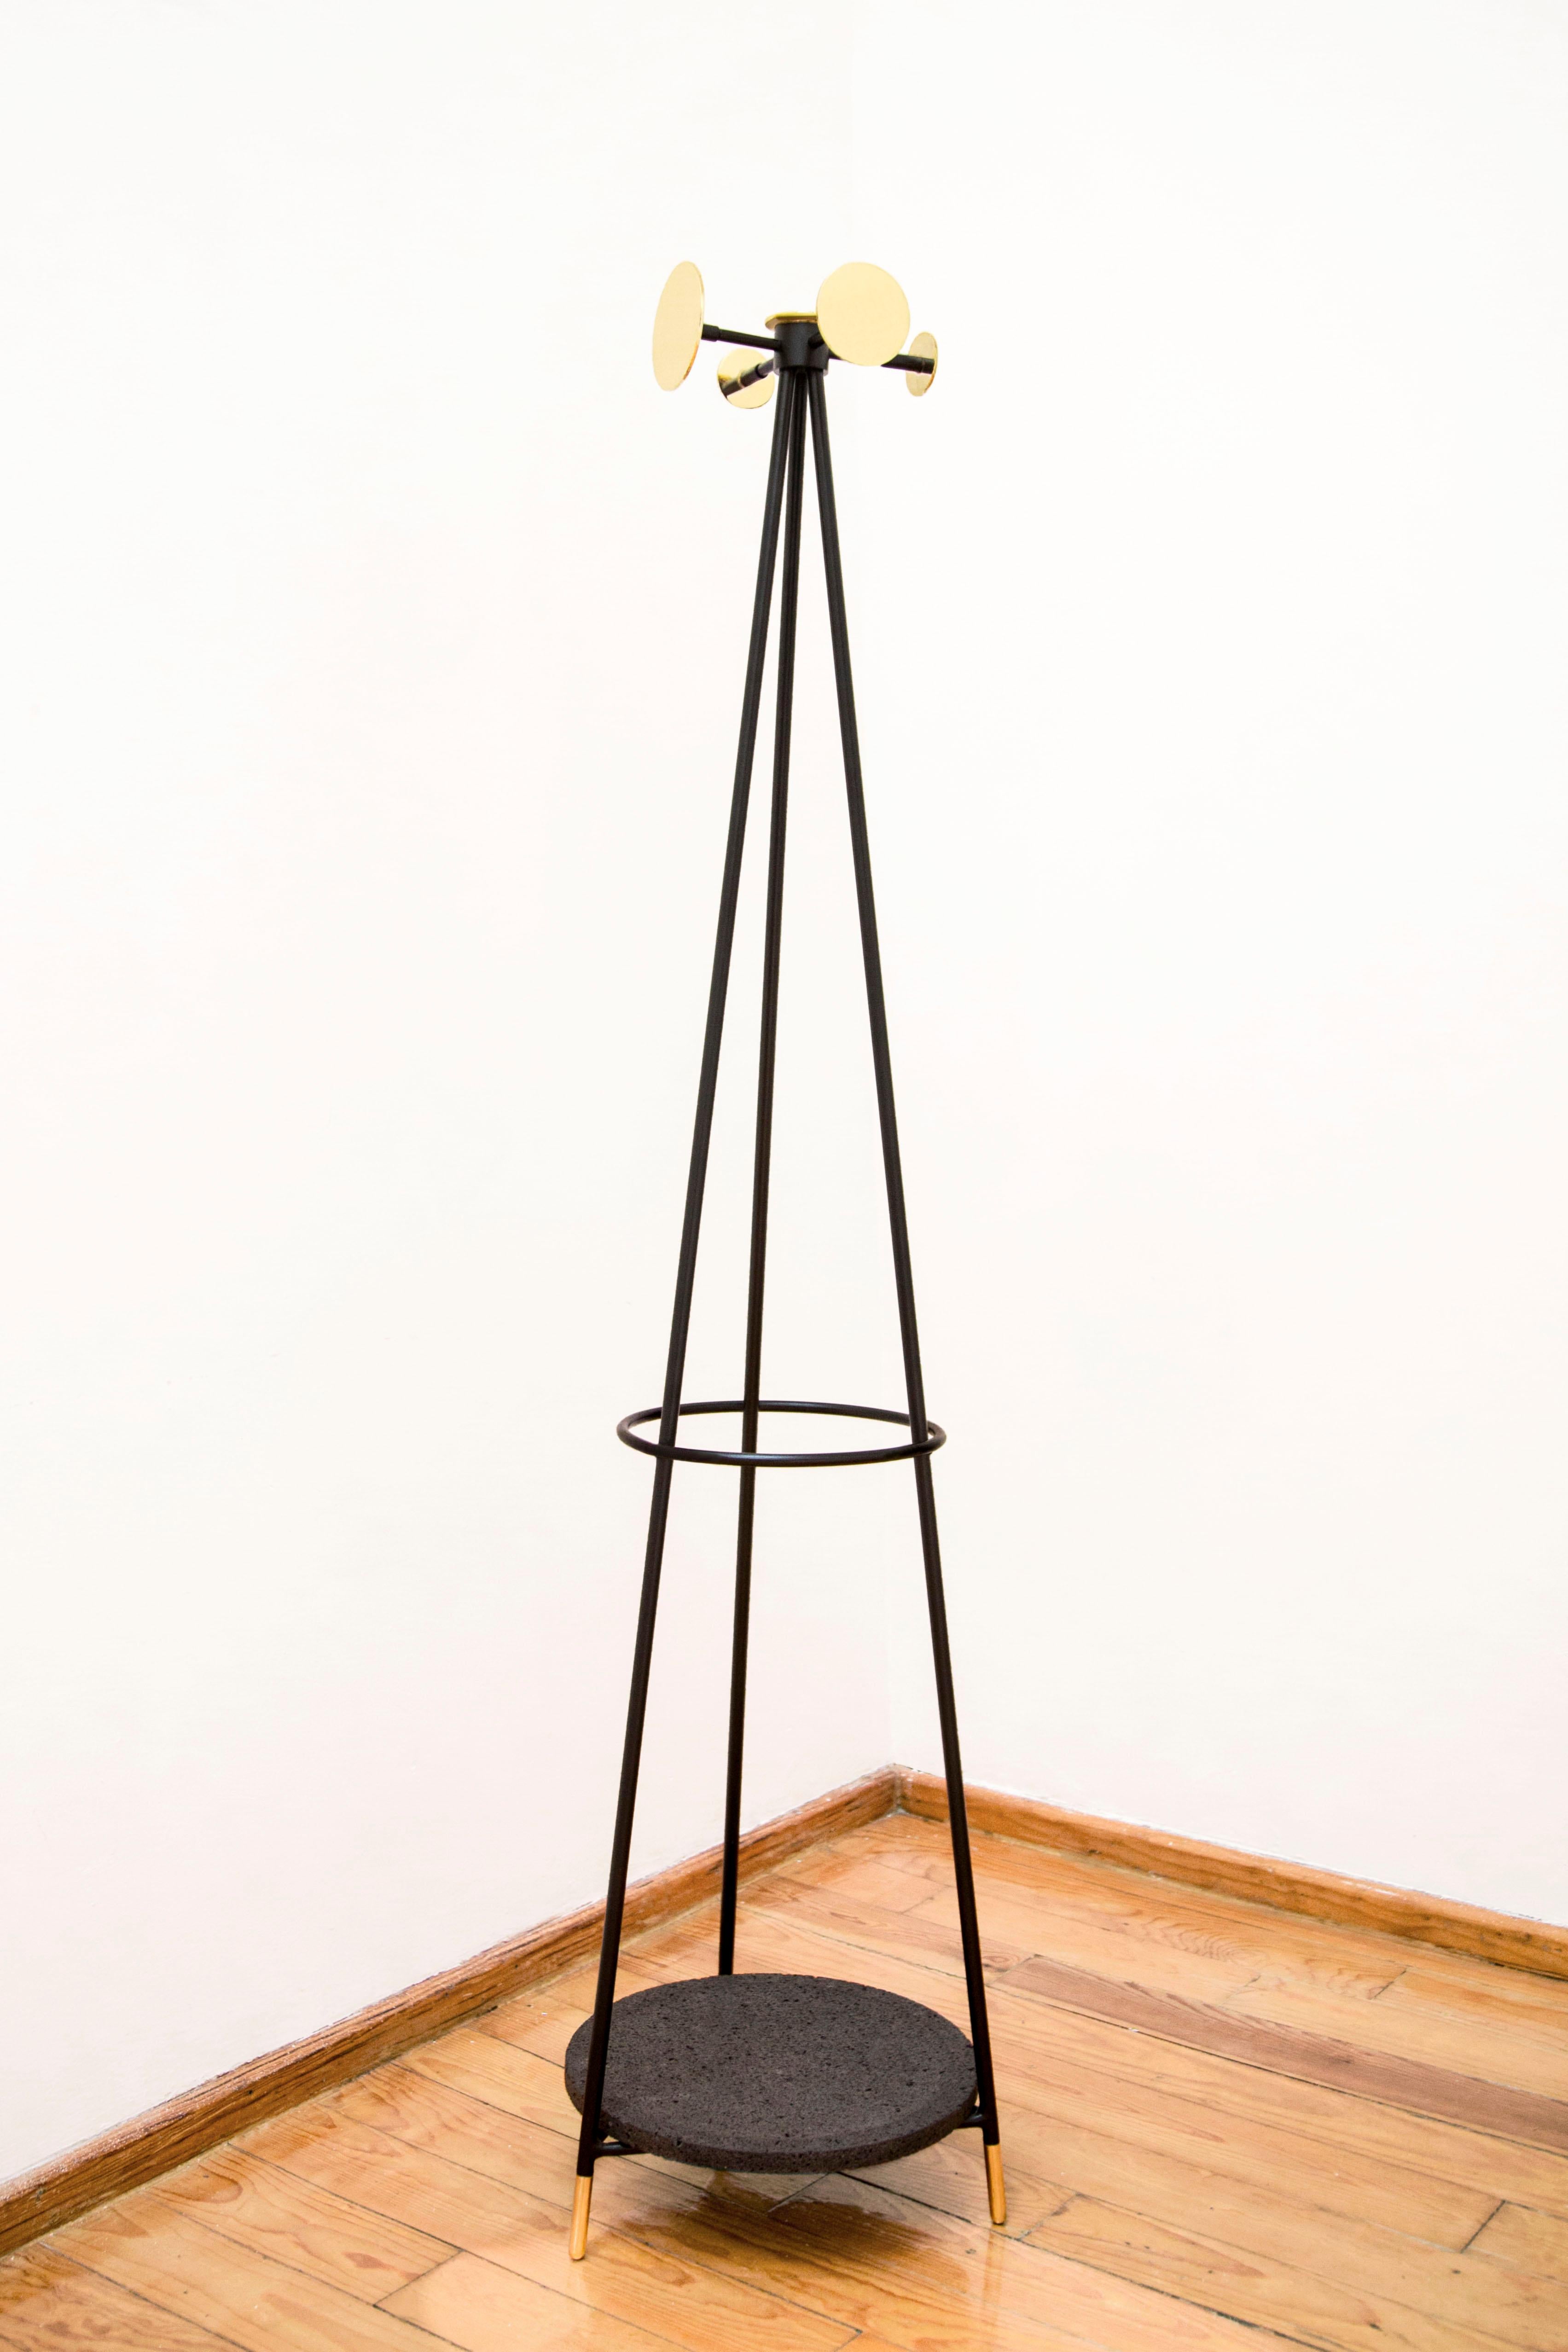 Mexican Brass Coat and Umbrella Stand by Comité de Proyectos